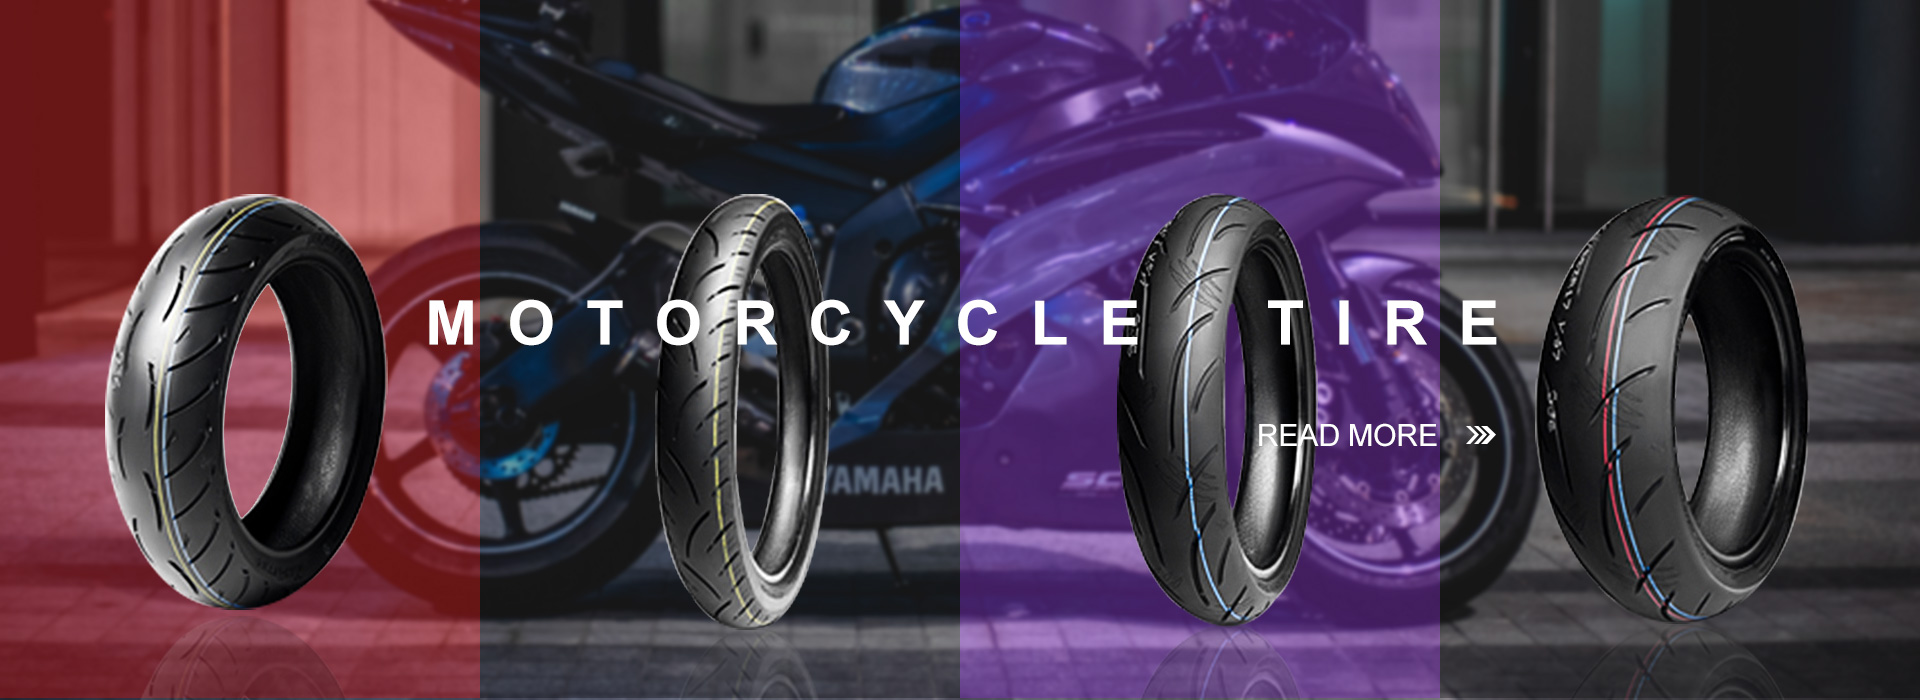 MOTORCYCLE TIREMOTORCYCLE TIRE